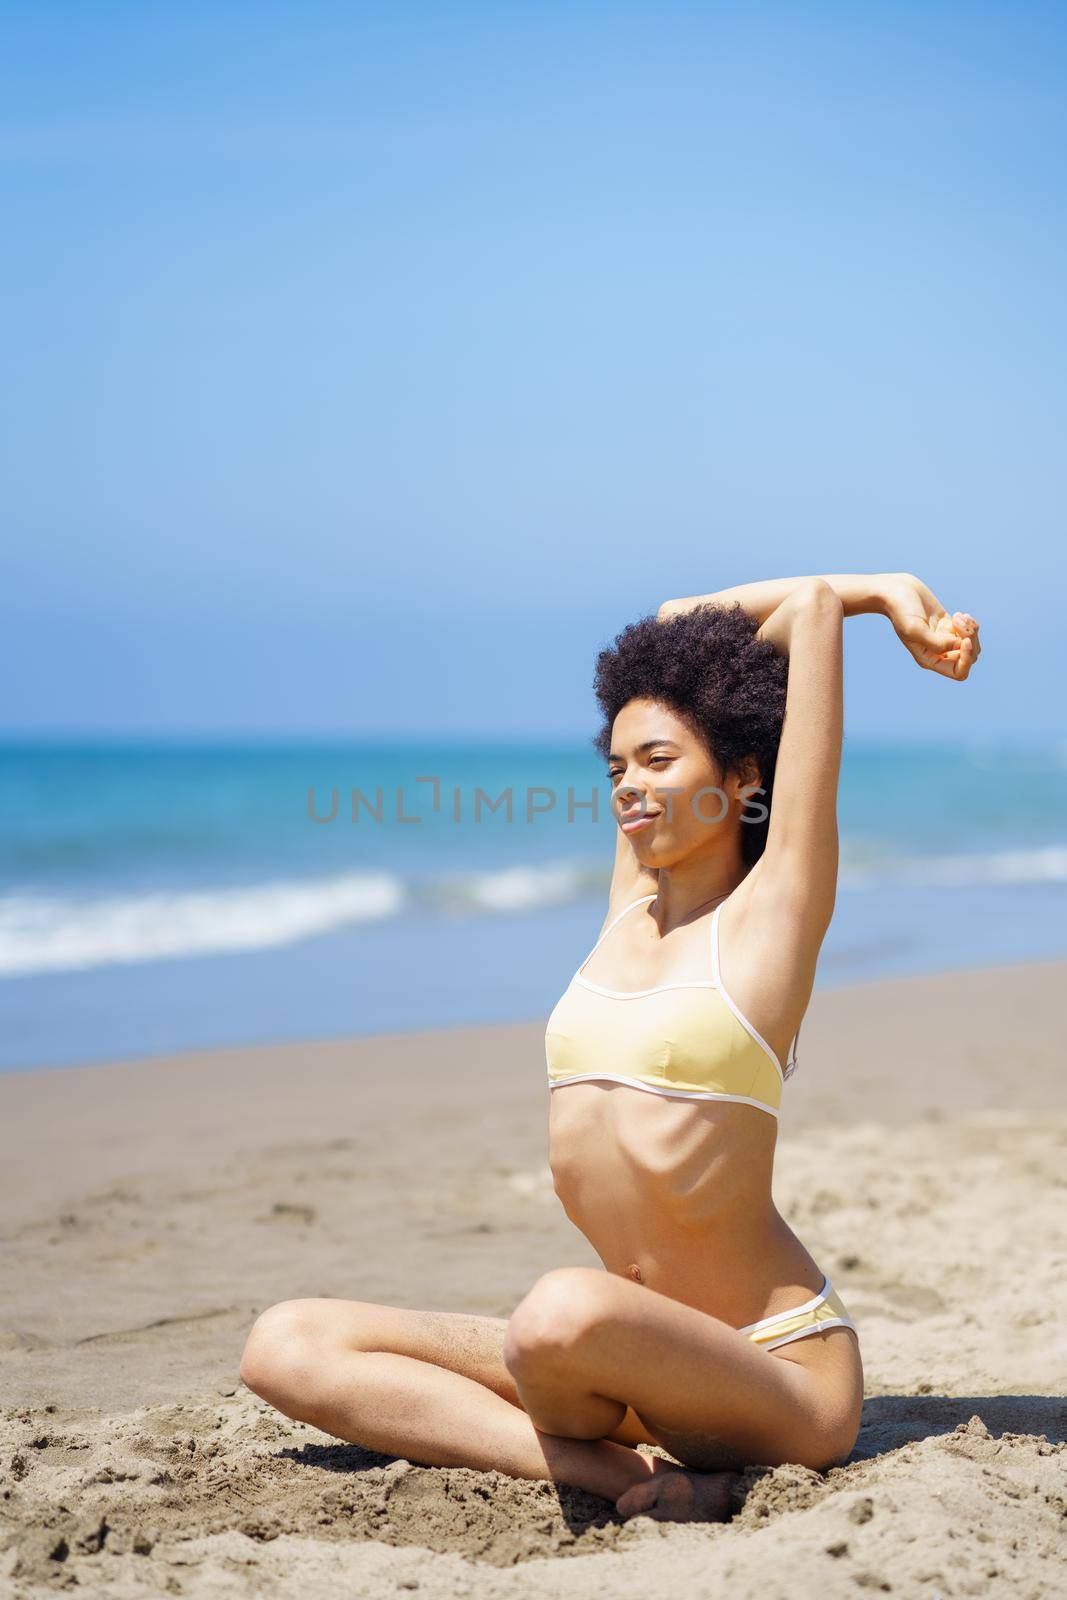 Black woman, wearing a yellow bikini, sitting on the beach relaxing and stretching her body.